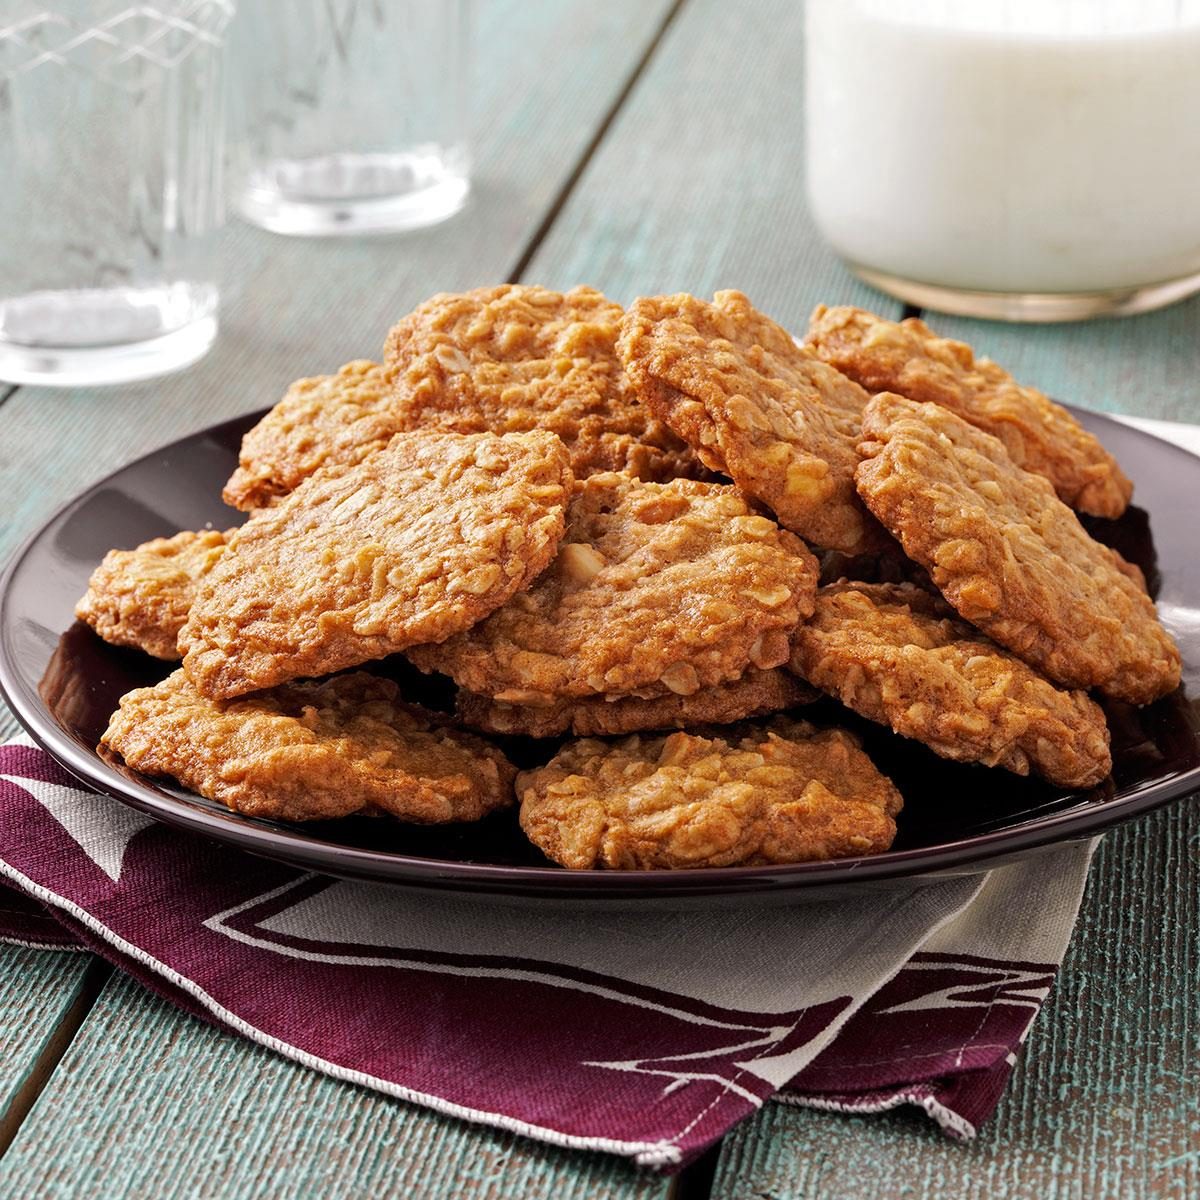 Toasted Oatmeal Cookies Recipe: How to Make It